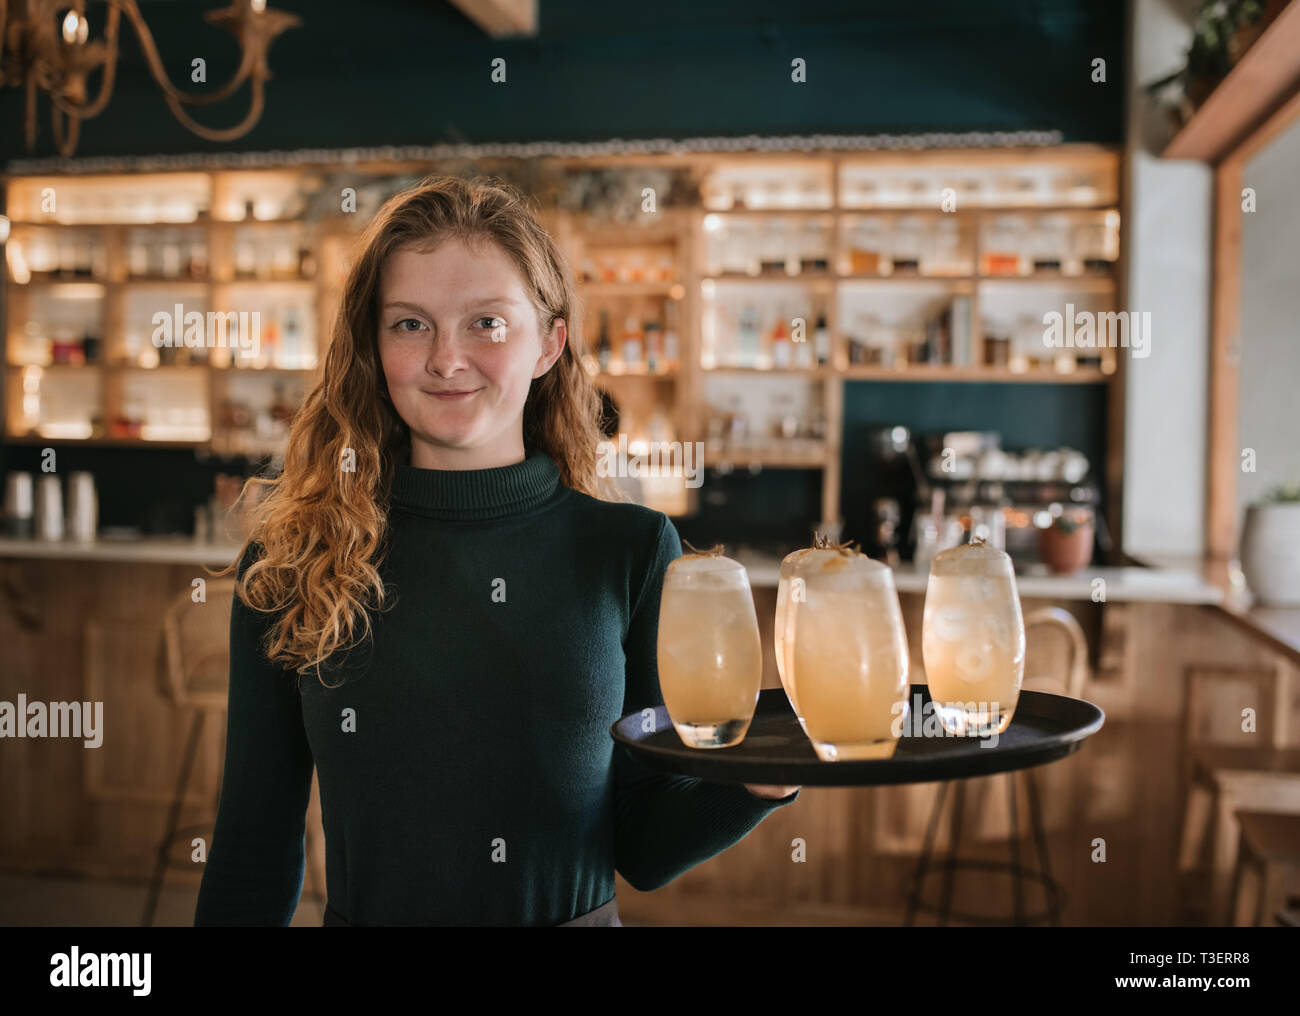 Smiling bar waitress holding a tray of drinks Stock Photo